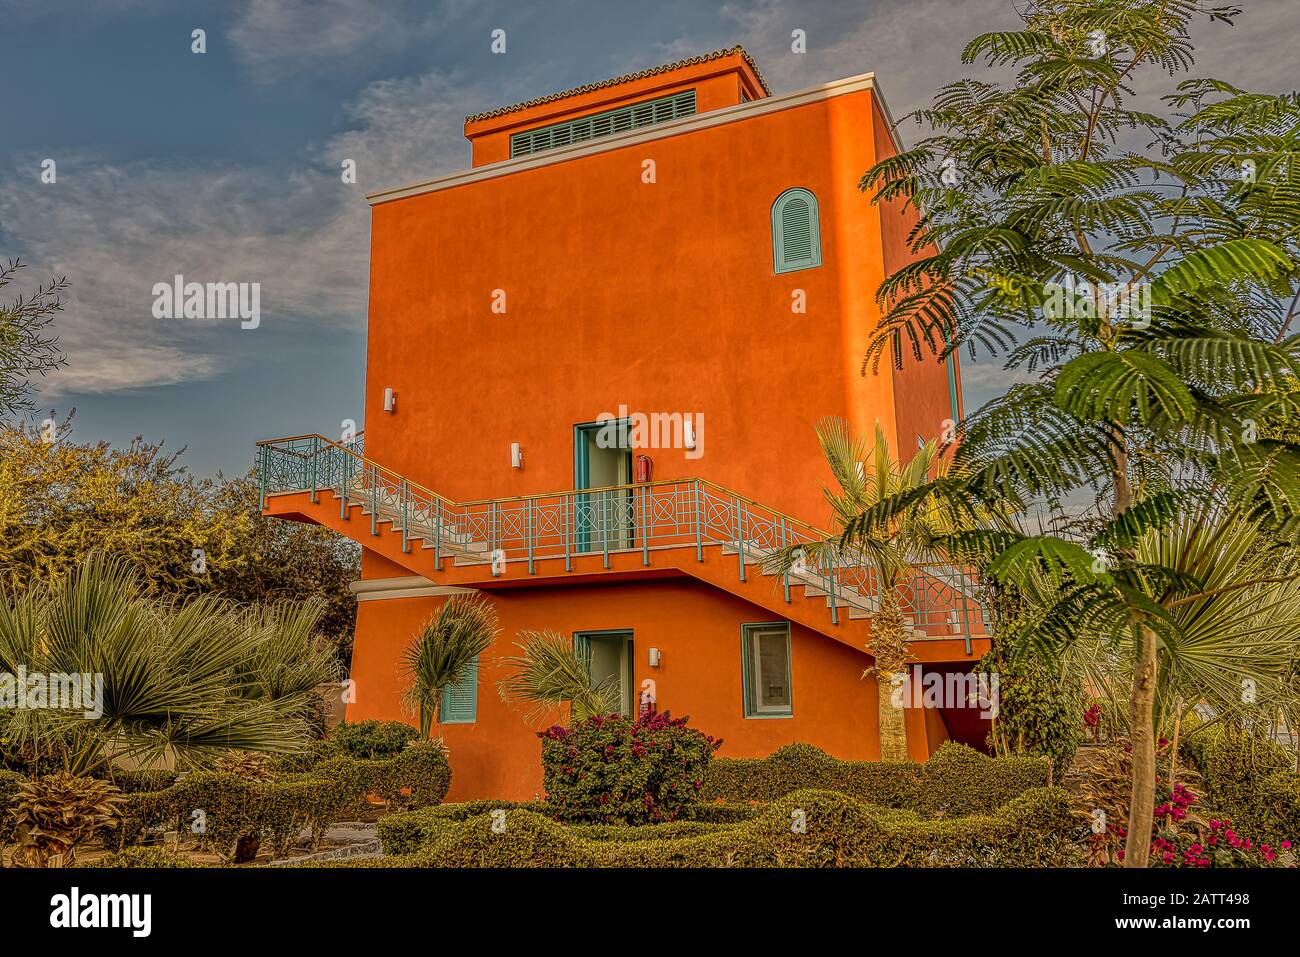 A square red ocher-clored house among palms in the sunshine against a blue sky, El Gouna, Egypt, January 12, 2020 Stock Photo